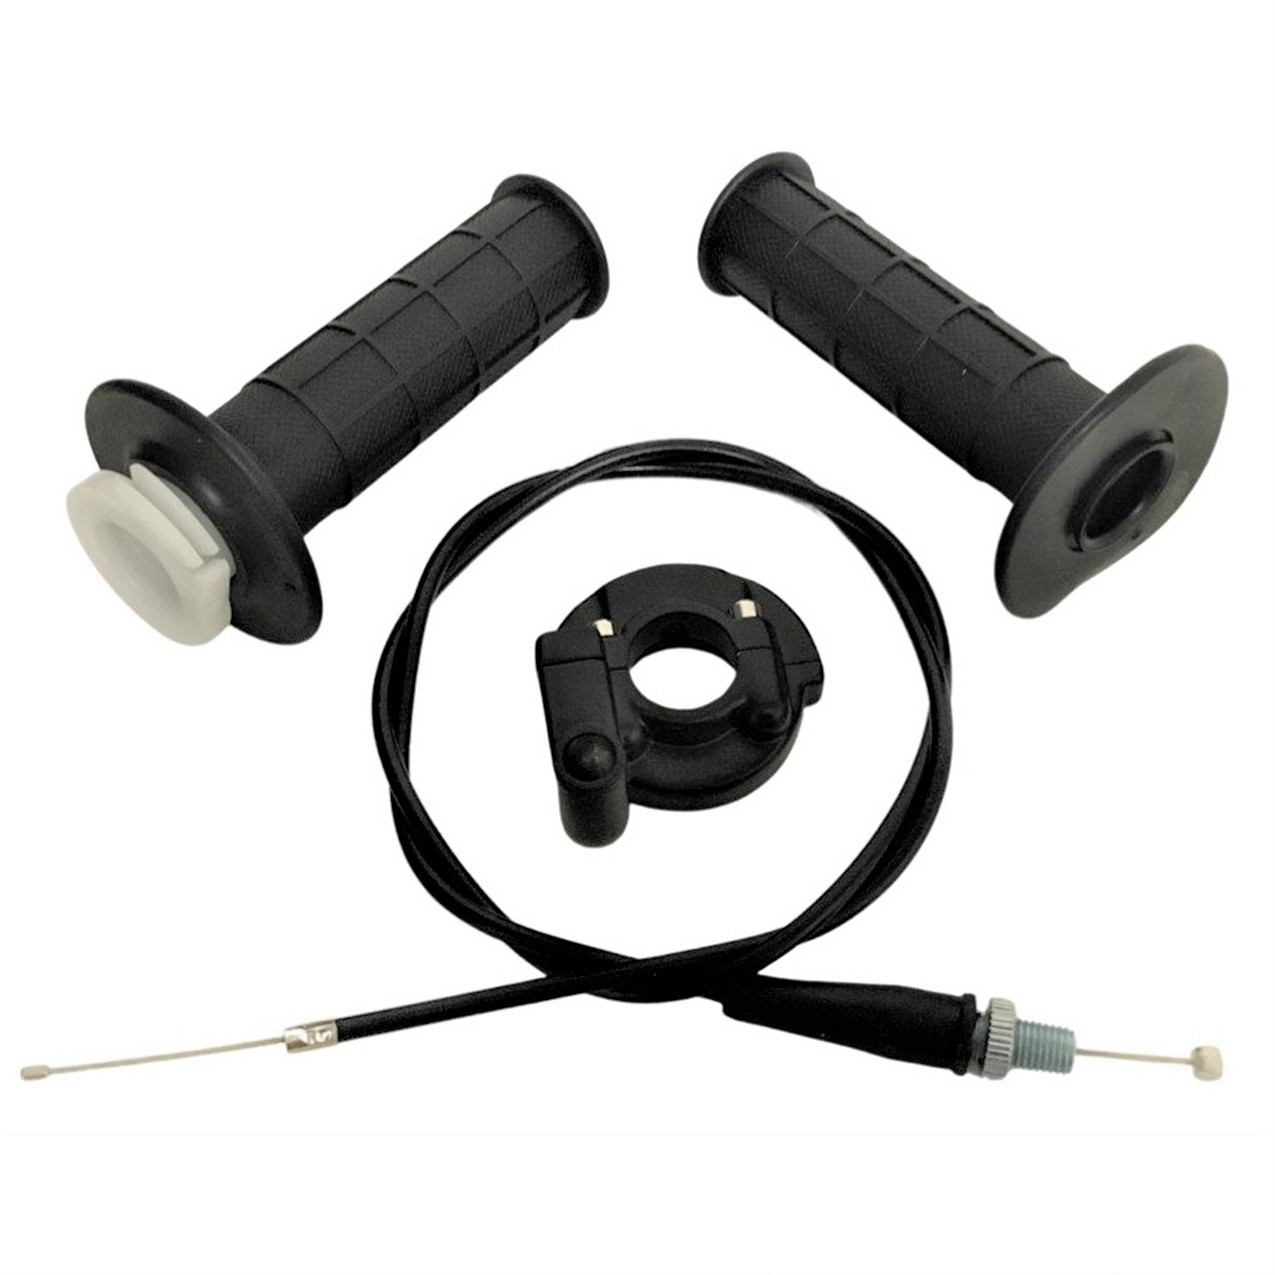 Throttle Assembly Kit Comes with Throttle Tube, Housing, and Cable 34.5/39.25in